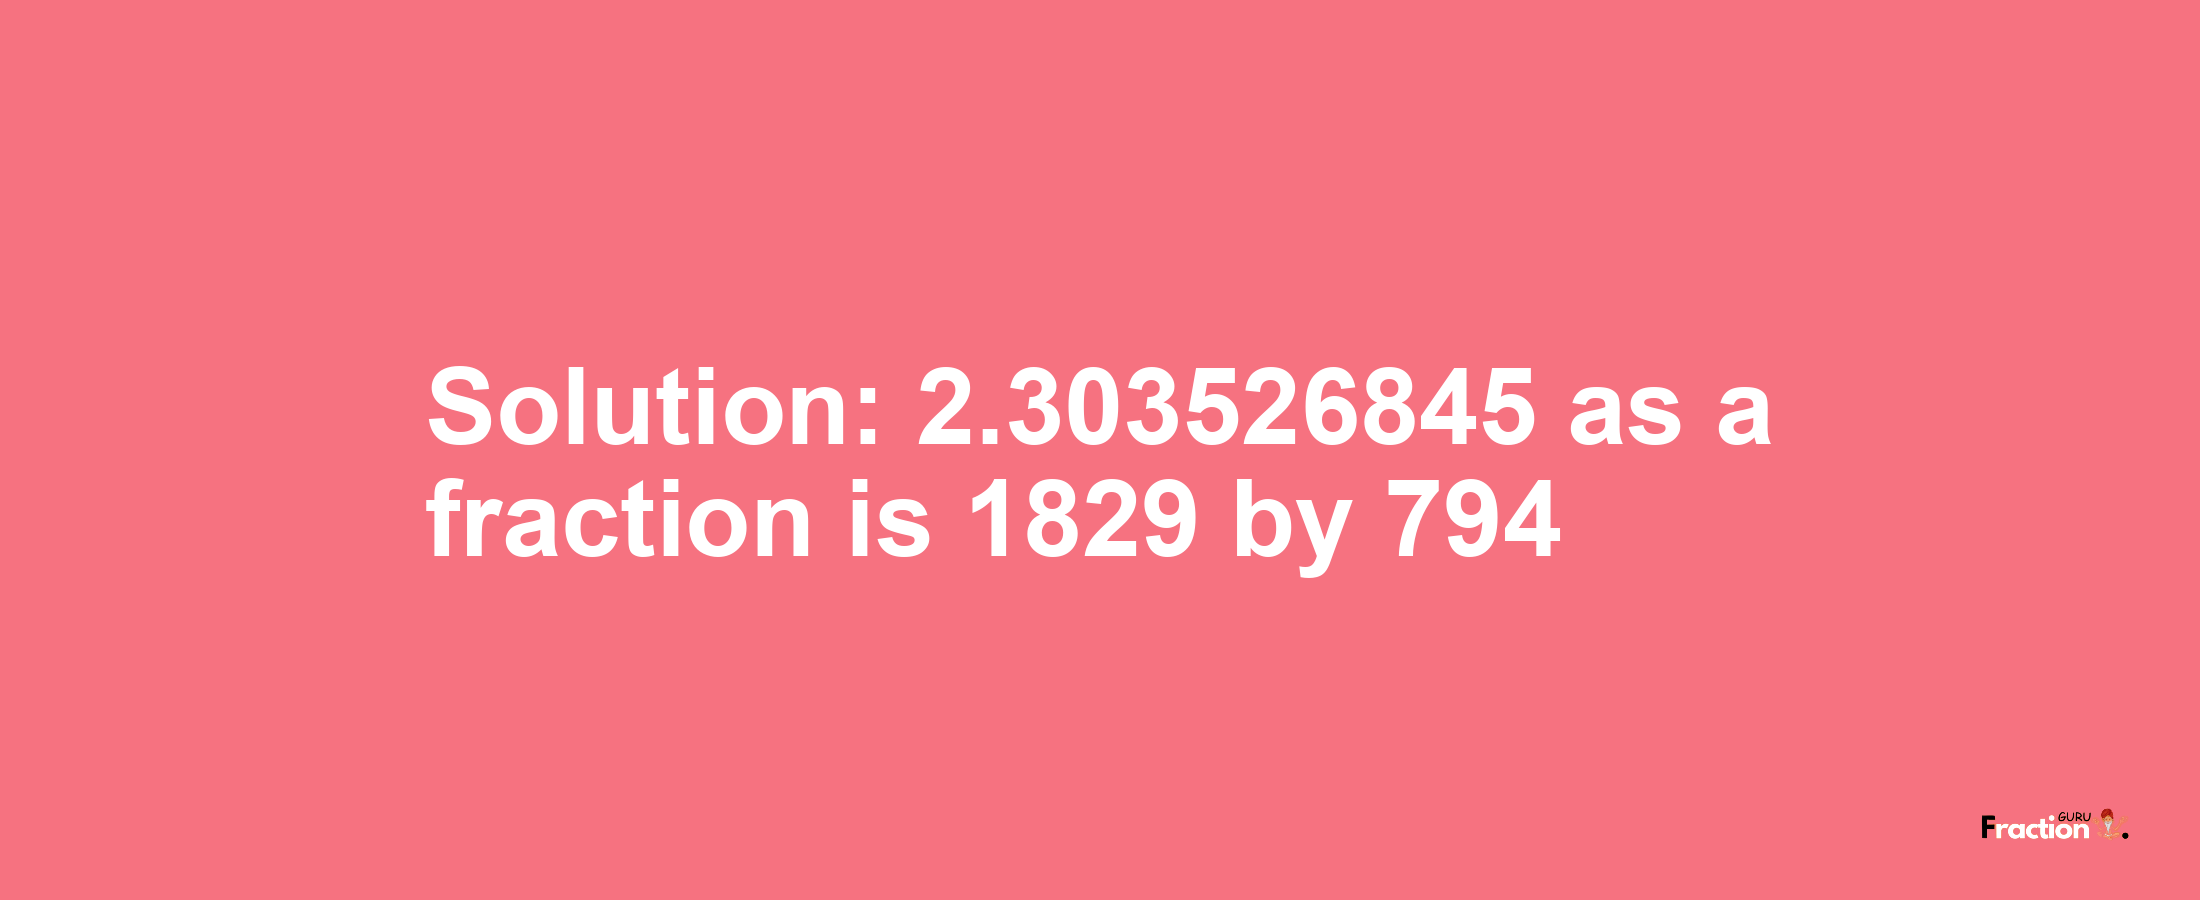 Solution:2.303526845 as a fraction is 1829/794